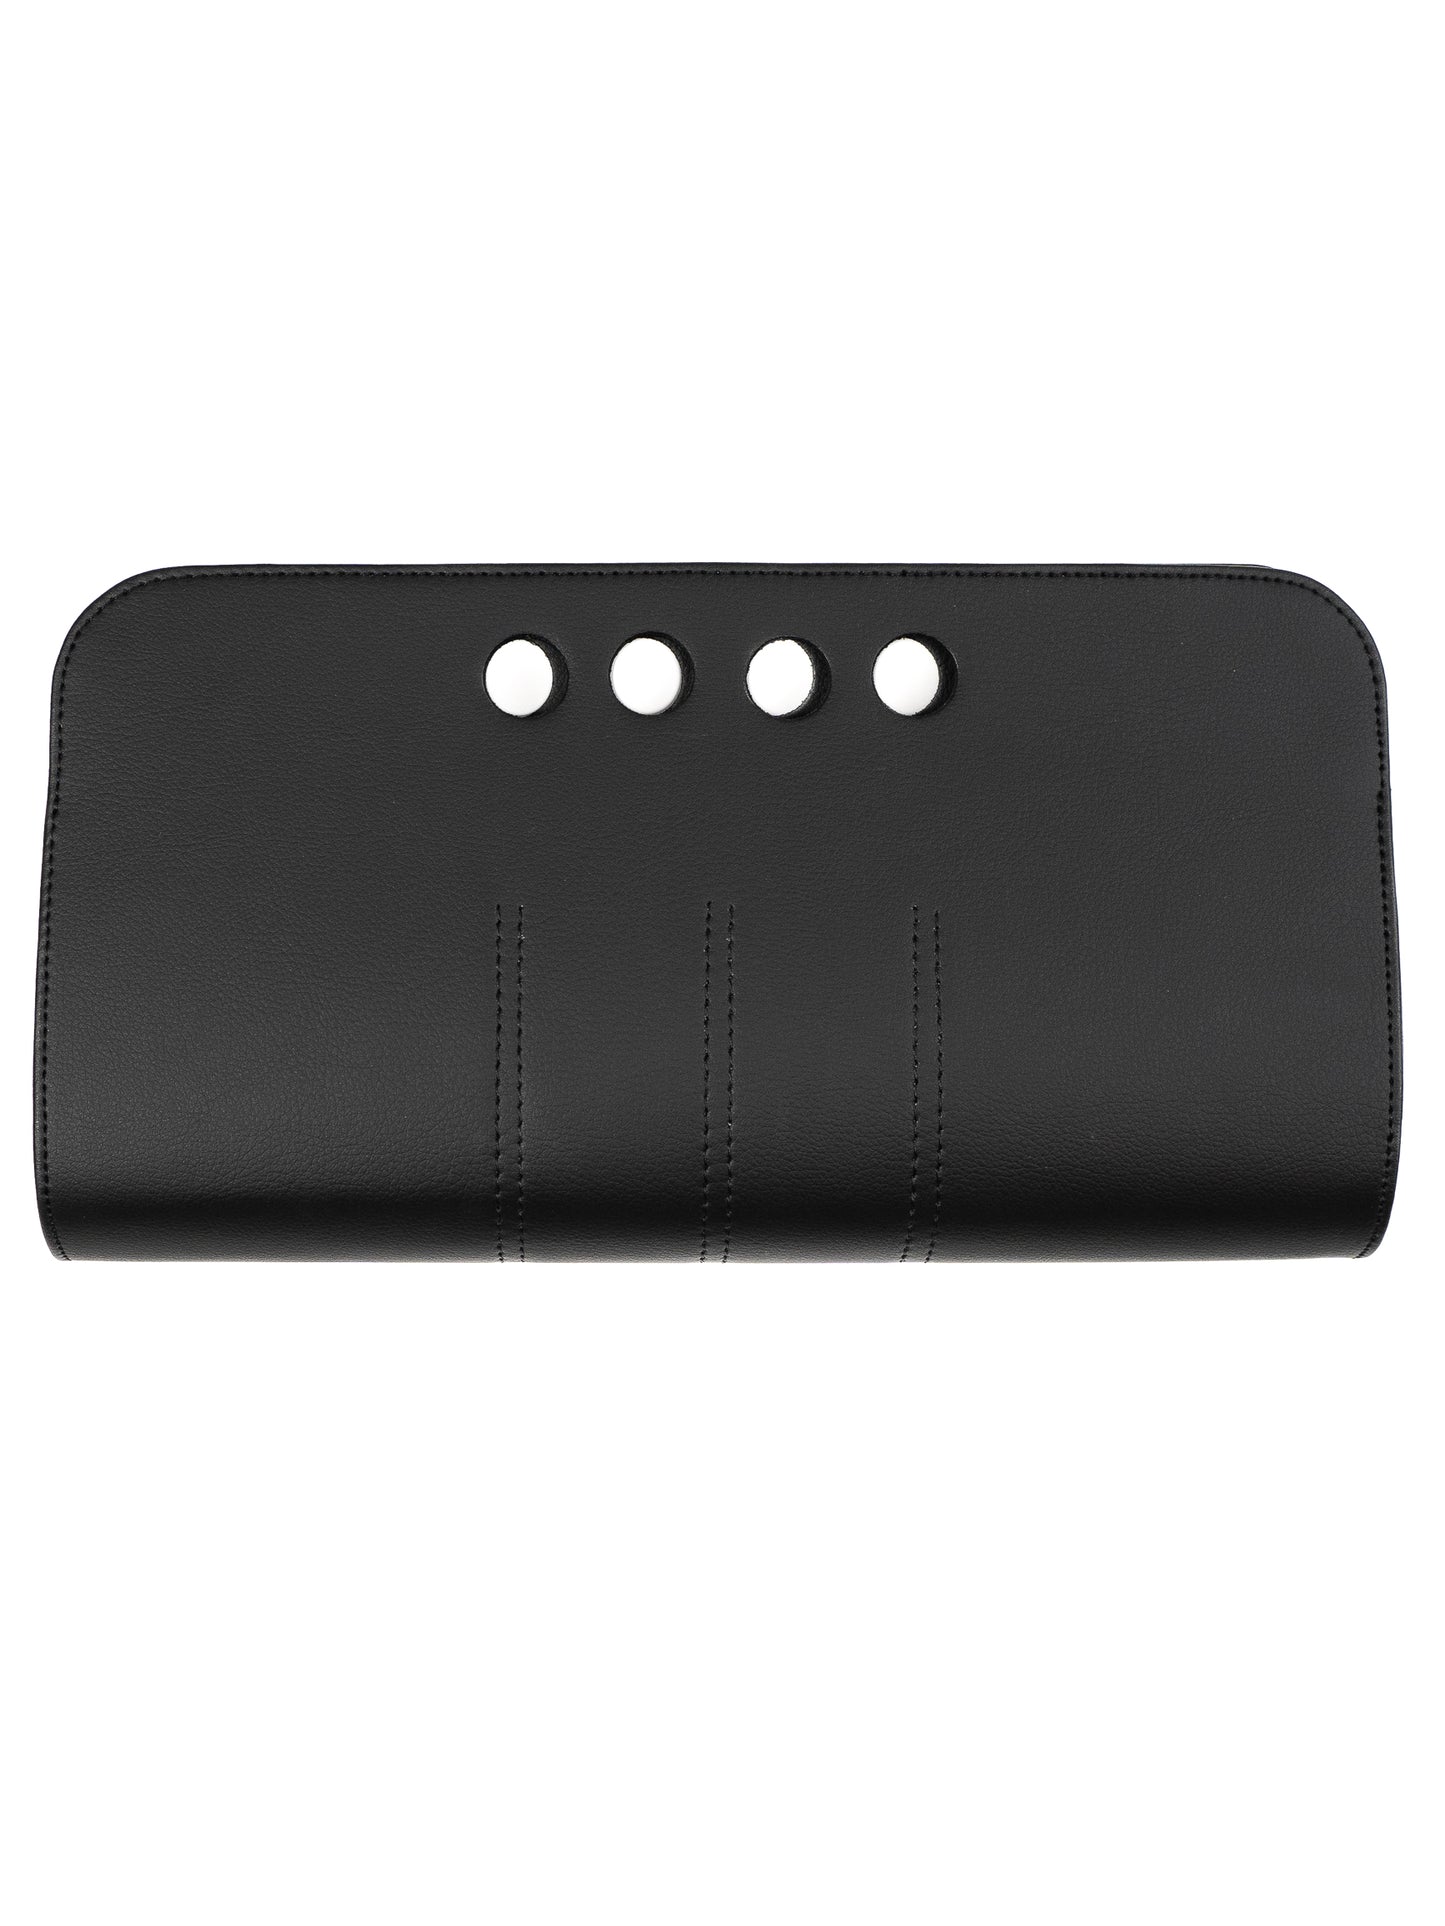 Chic Vegan Leather Clutch - Black/Small (limited edition, Agave)